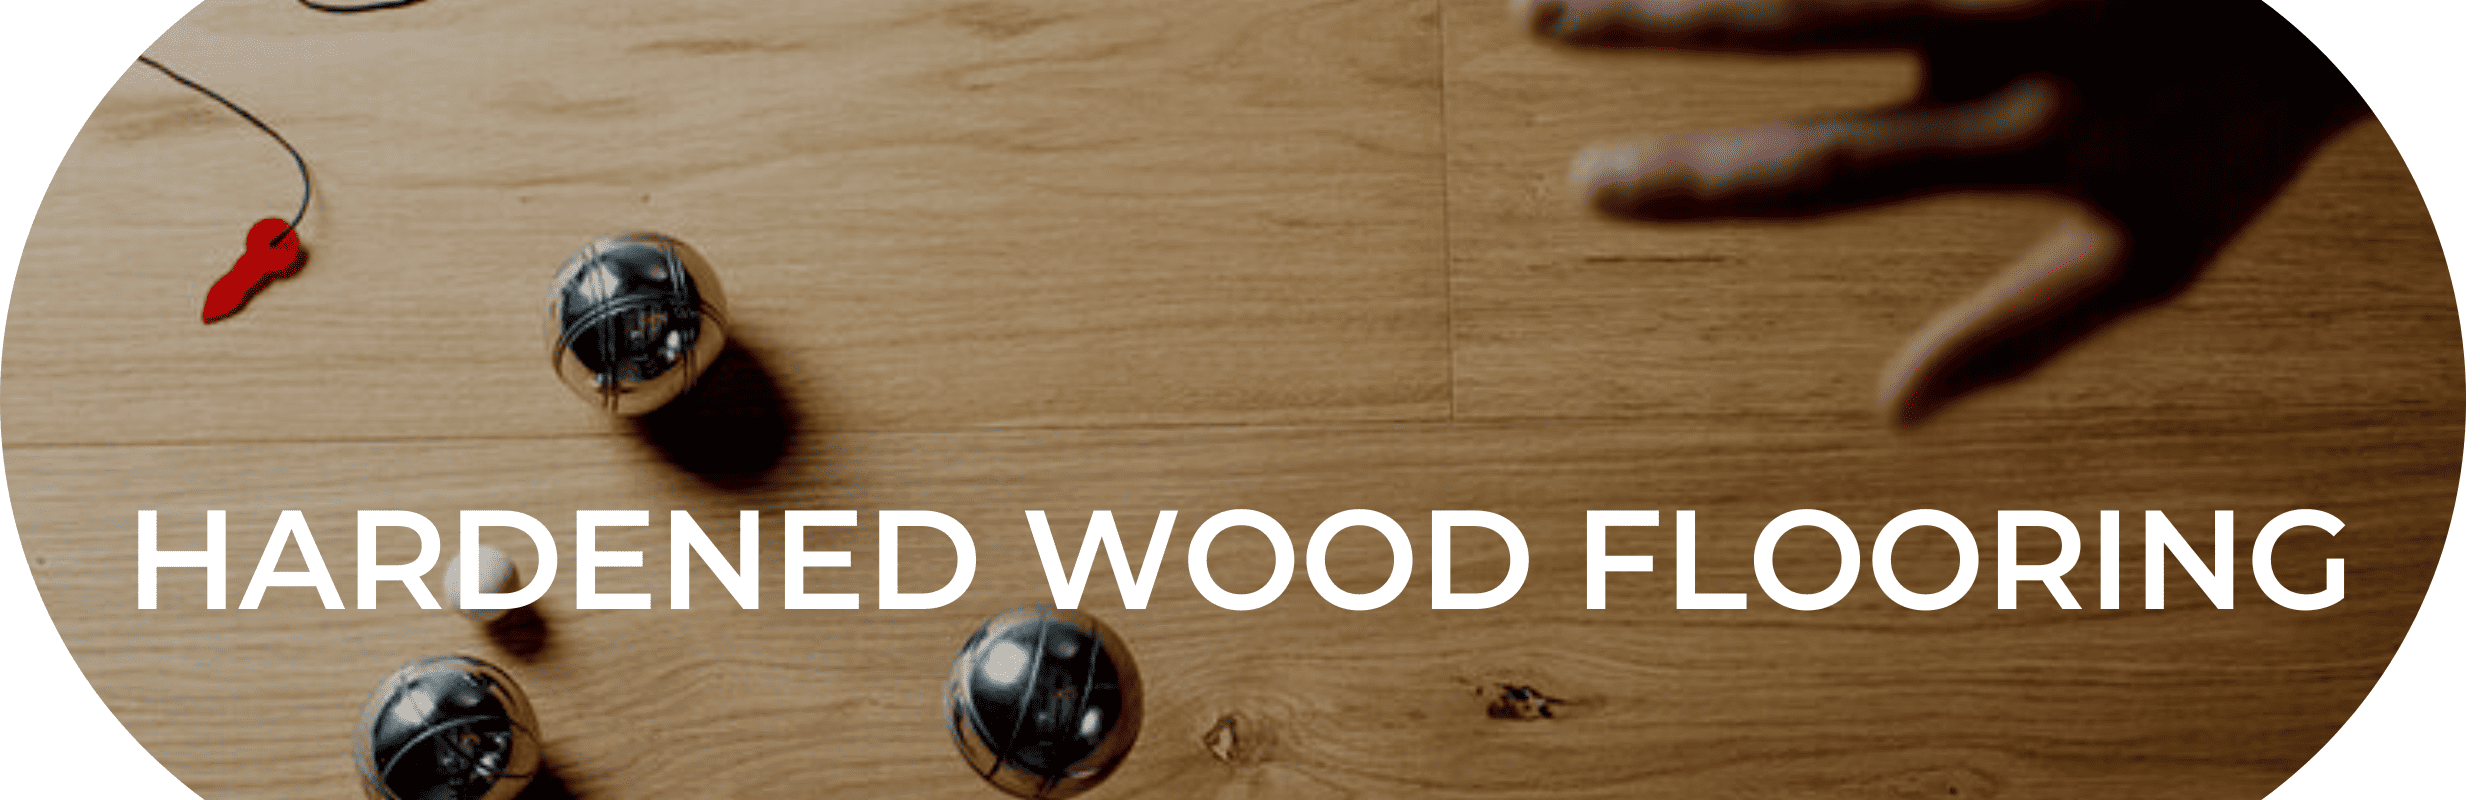 Viken and Valinge (now known as BJELIN) Hardened Wood Flooring - image of a child playing a game by throwing small but heavy metal toy balls onto a hardwood floor. The words hardened wood flooring are displayed prominently over the top of the photo